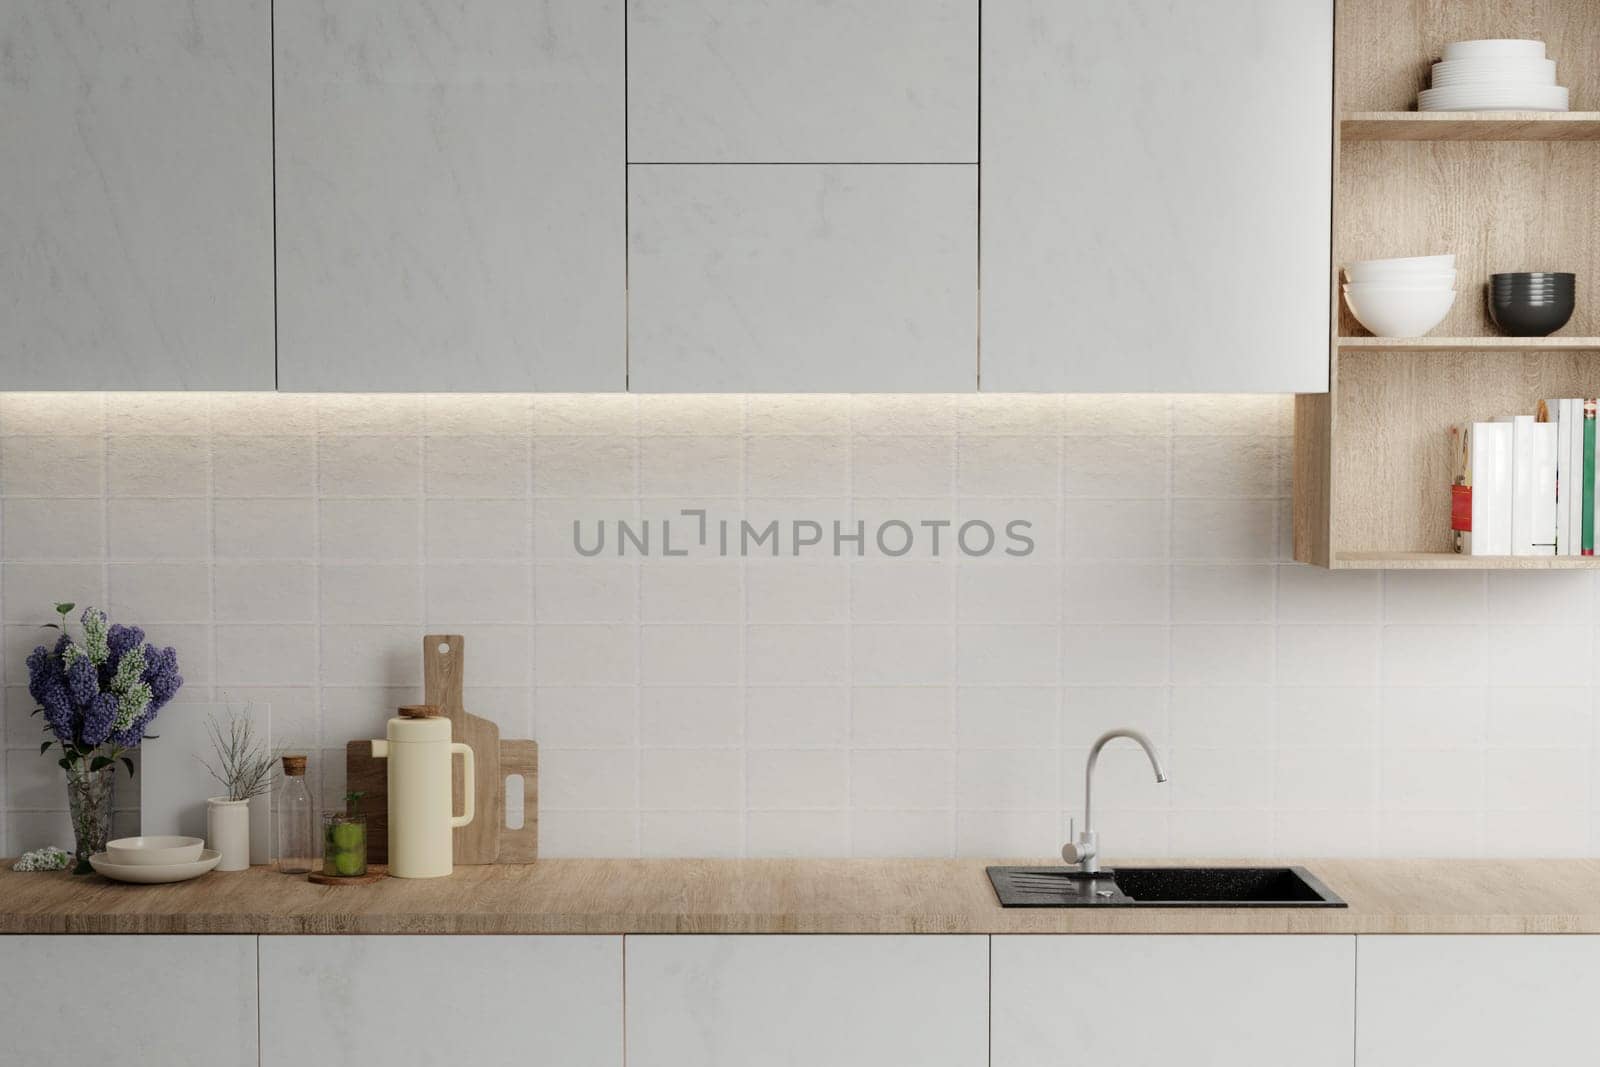 Minimal cozy counter mockup design for product presentation background or branding with bright wood top white counter and wall with mug chop fork spoon cup. Kitchen interior. 3D render illustration.